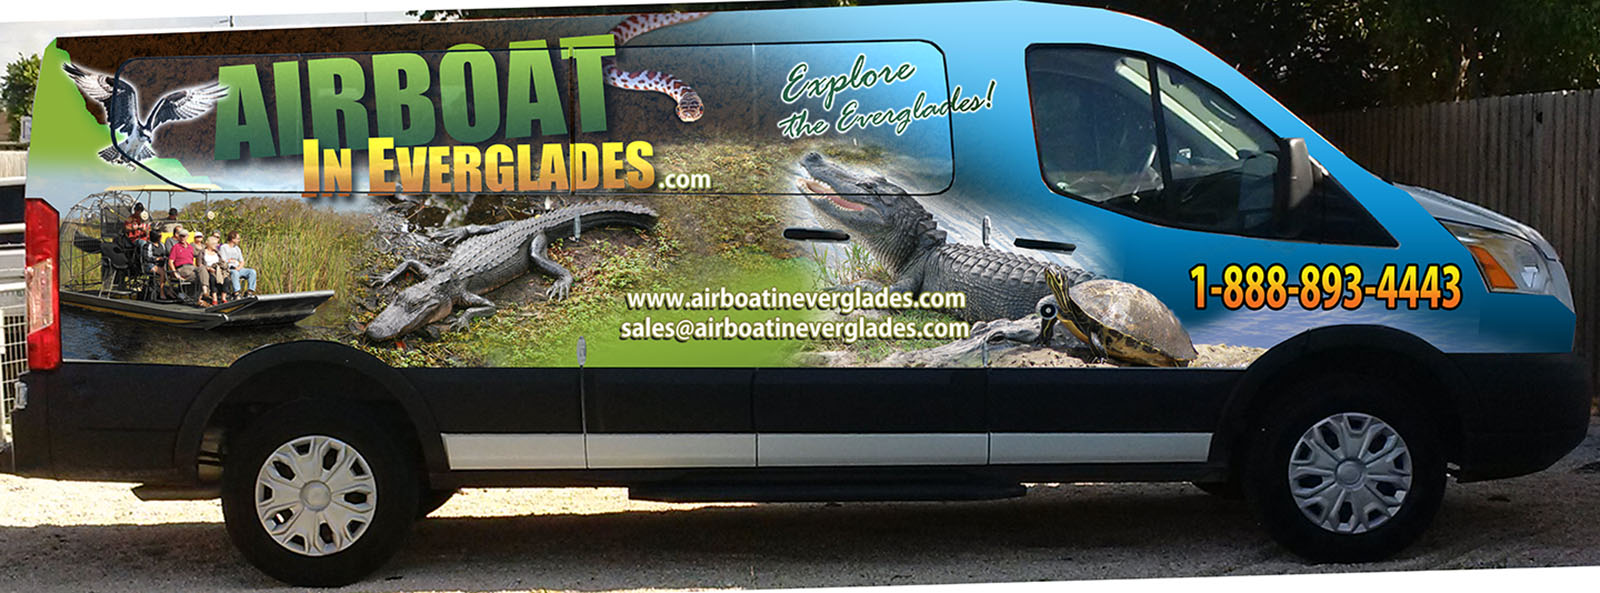 Best Airboat Tour - Airboat In Everglades - Miami's Best - 888-893-4443